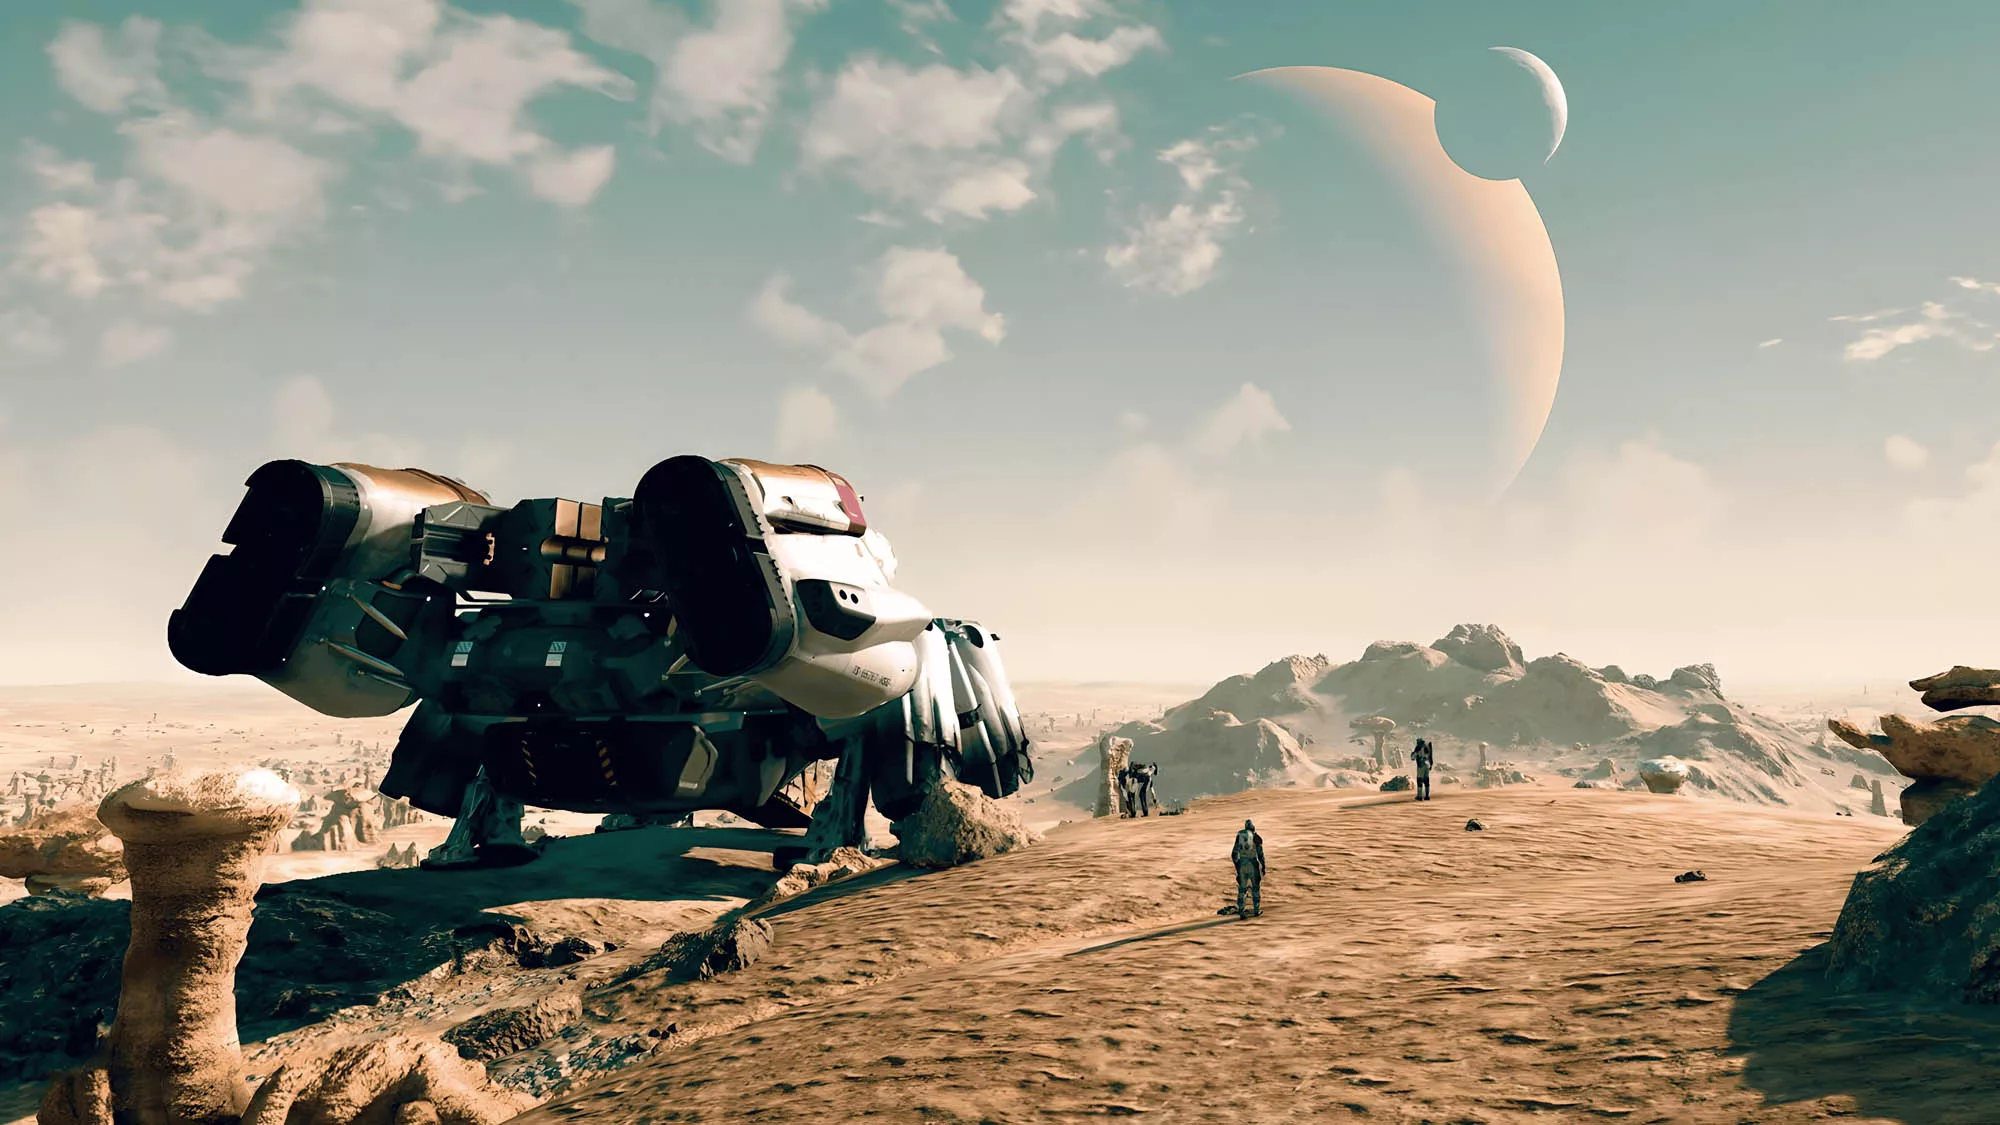 An image of a spaceship on a desert world with nearby planets and moons visible in the cloudy sky.